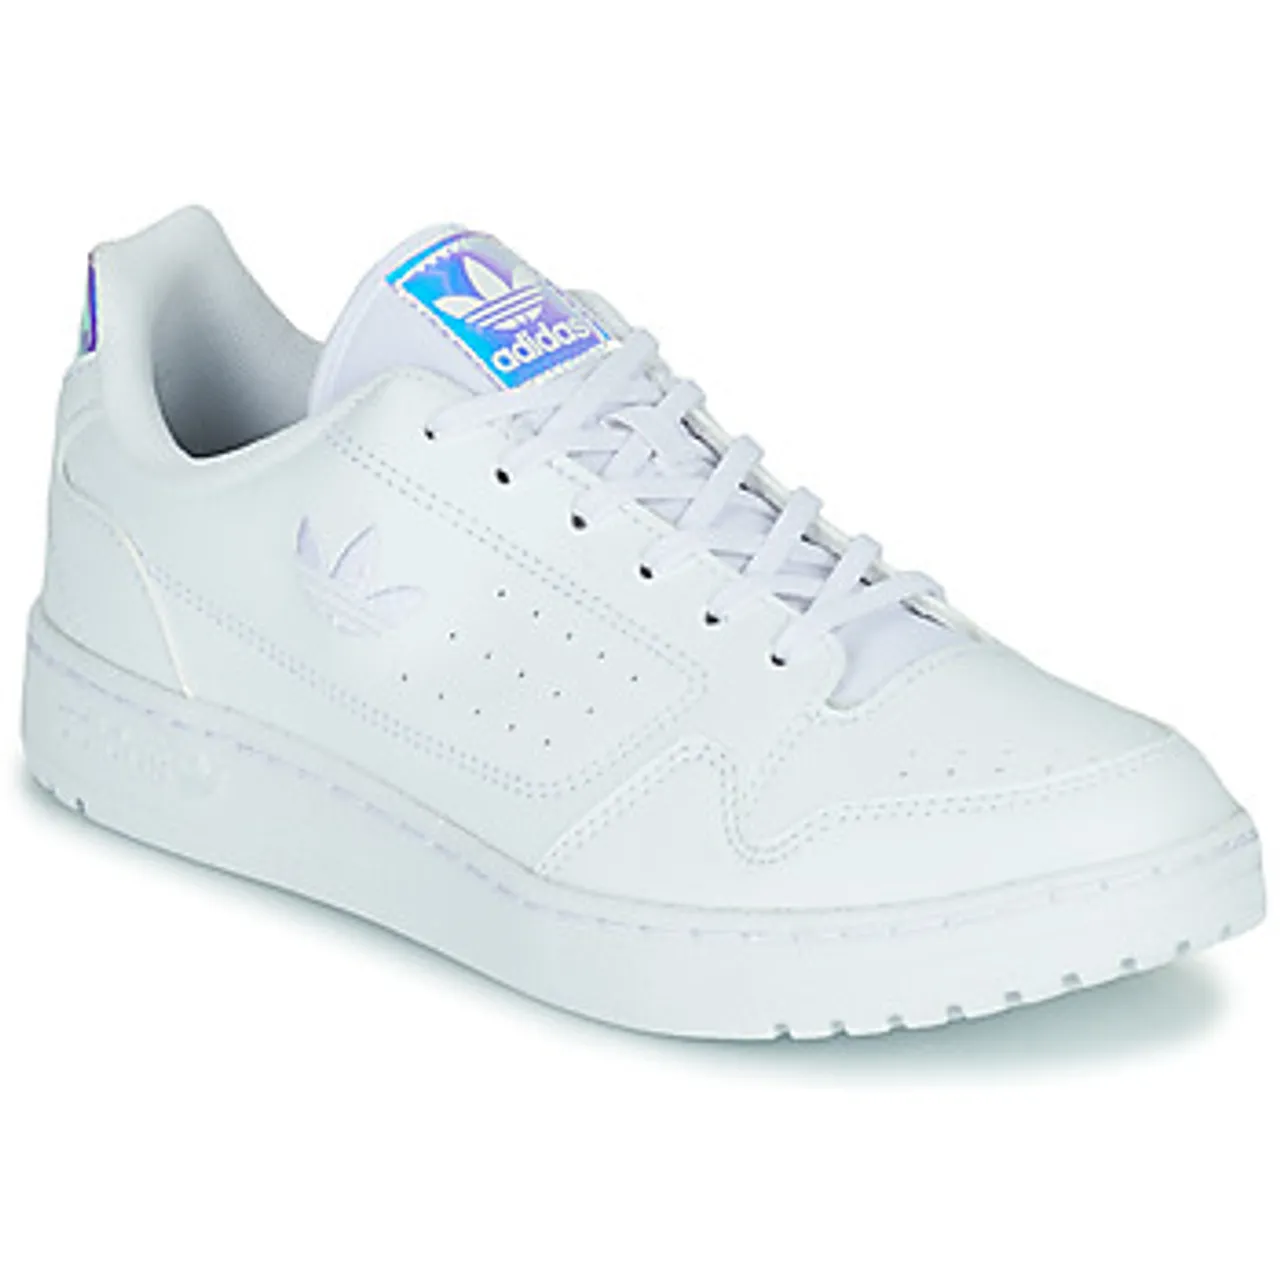 adidas  NY 90 J  boys's Children's Shoes (Trainers) in White